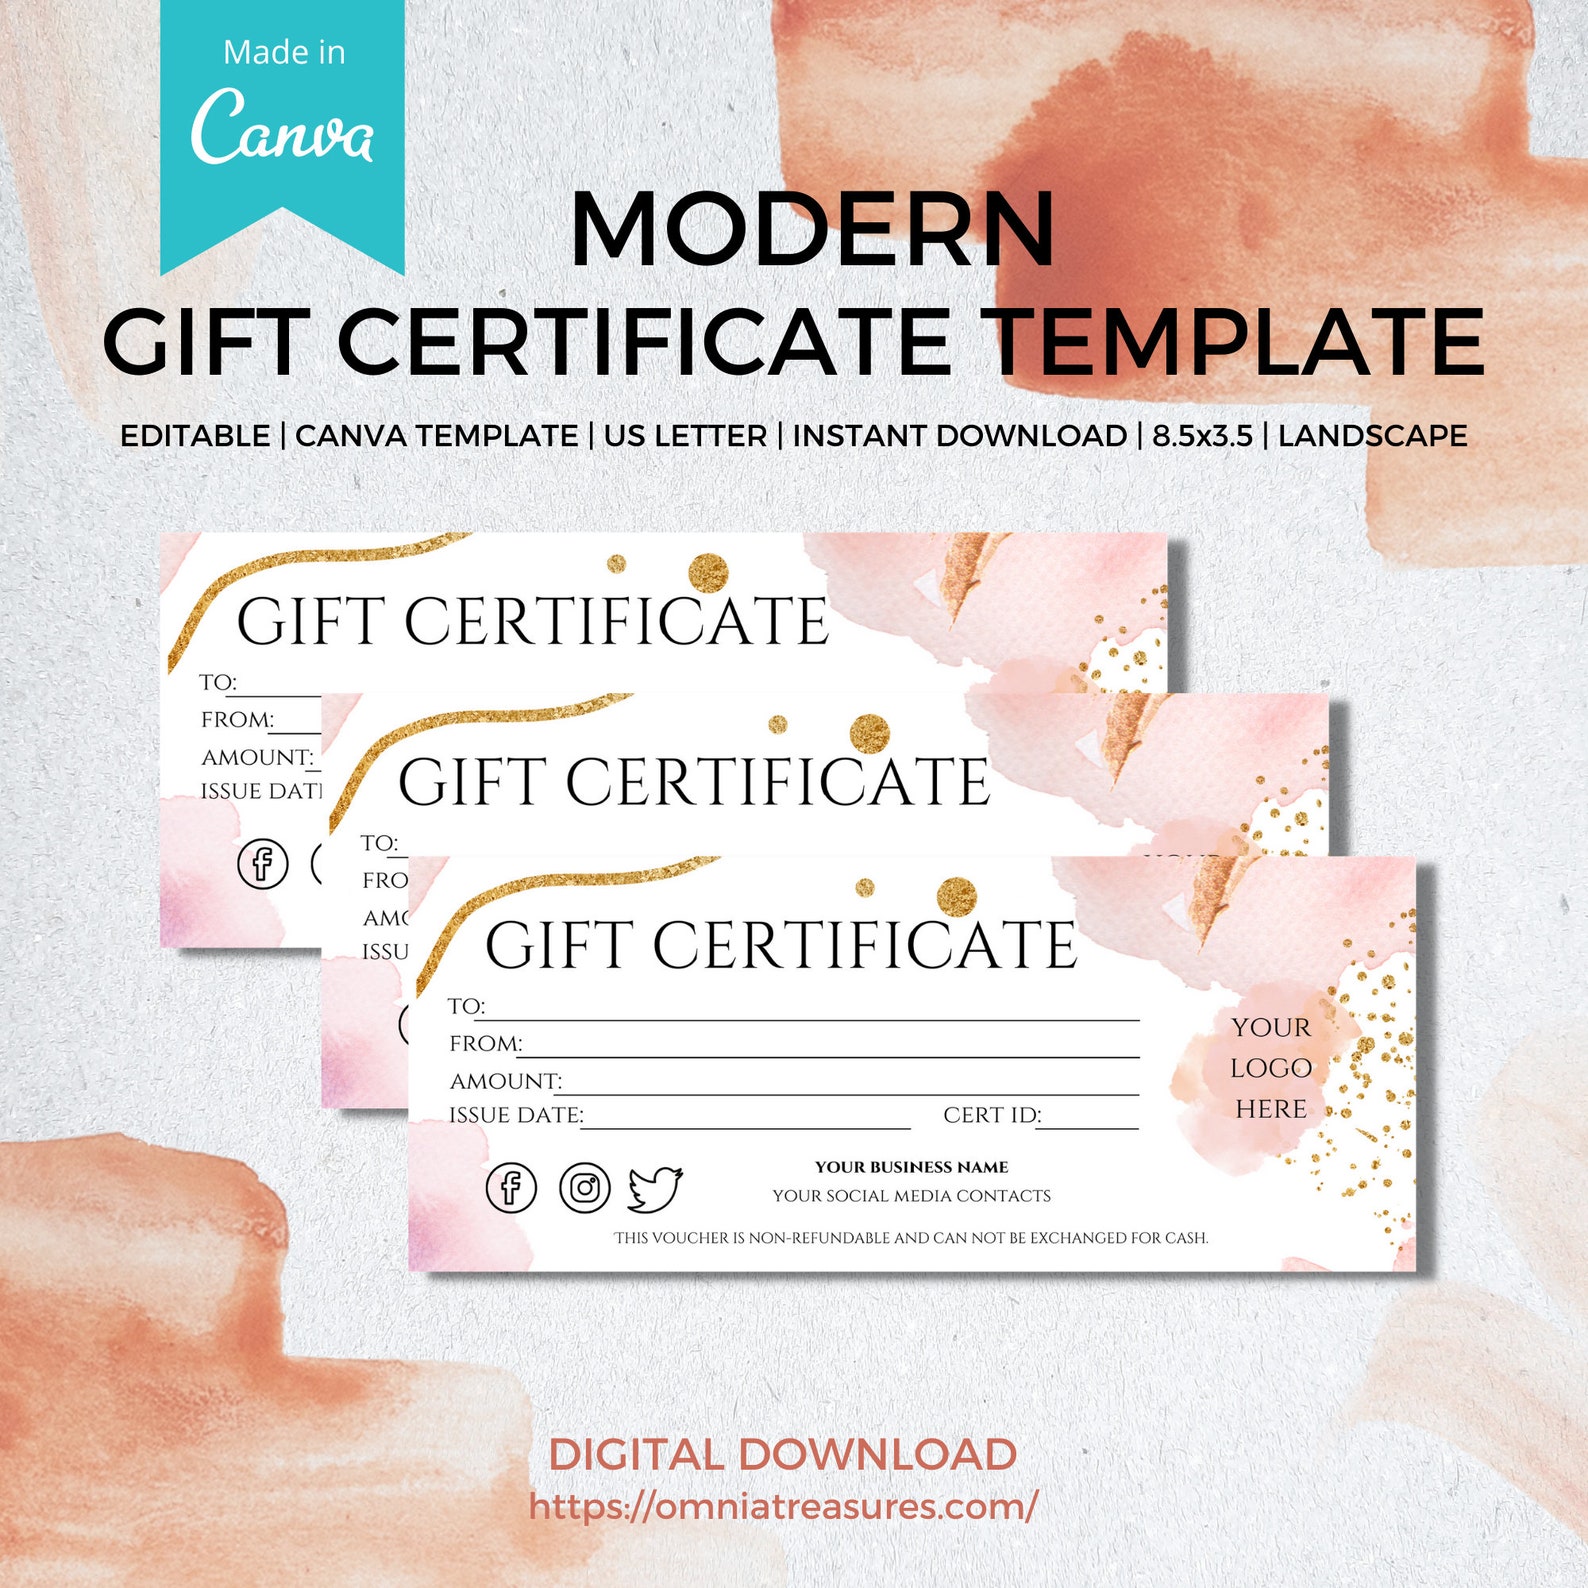 canva-gift-certificate-template-small-business-voucher-etsy